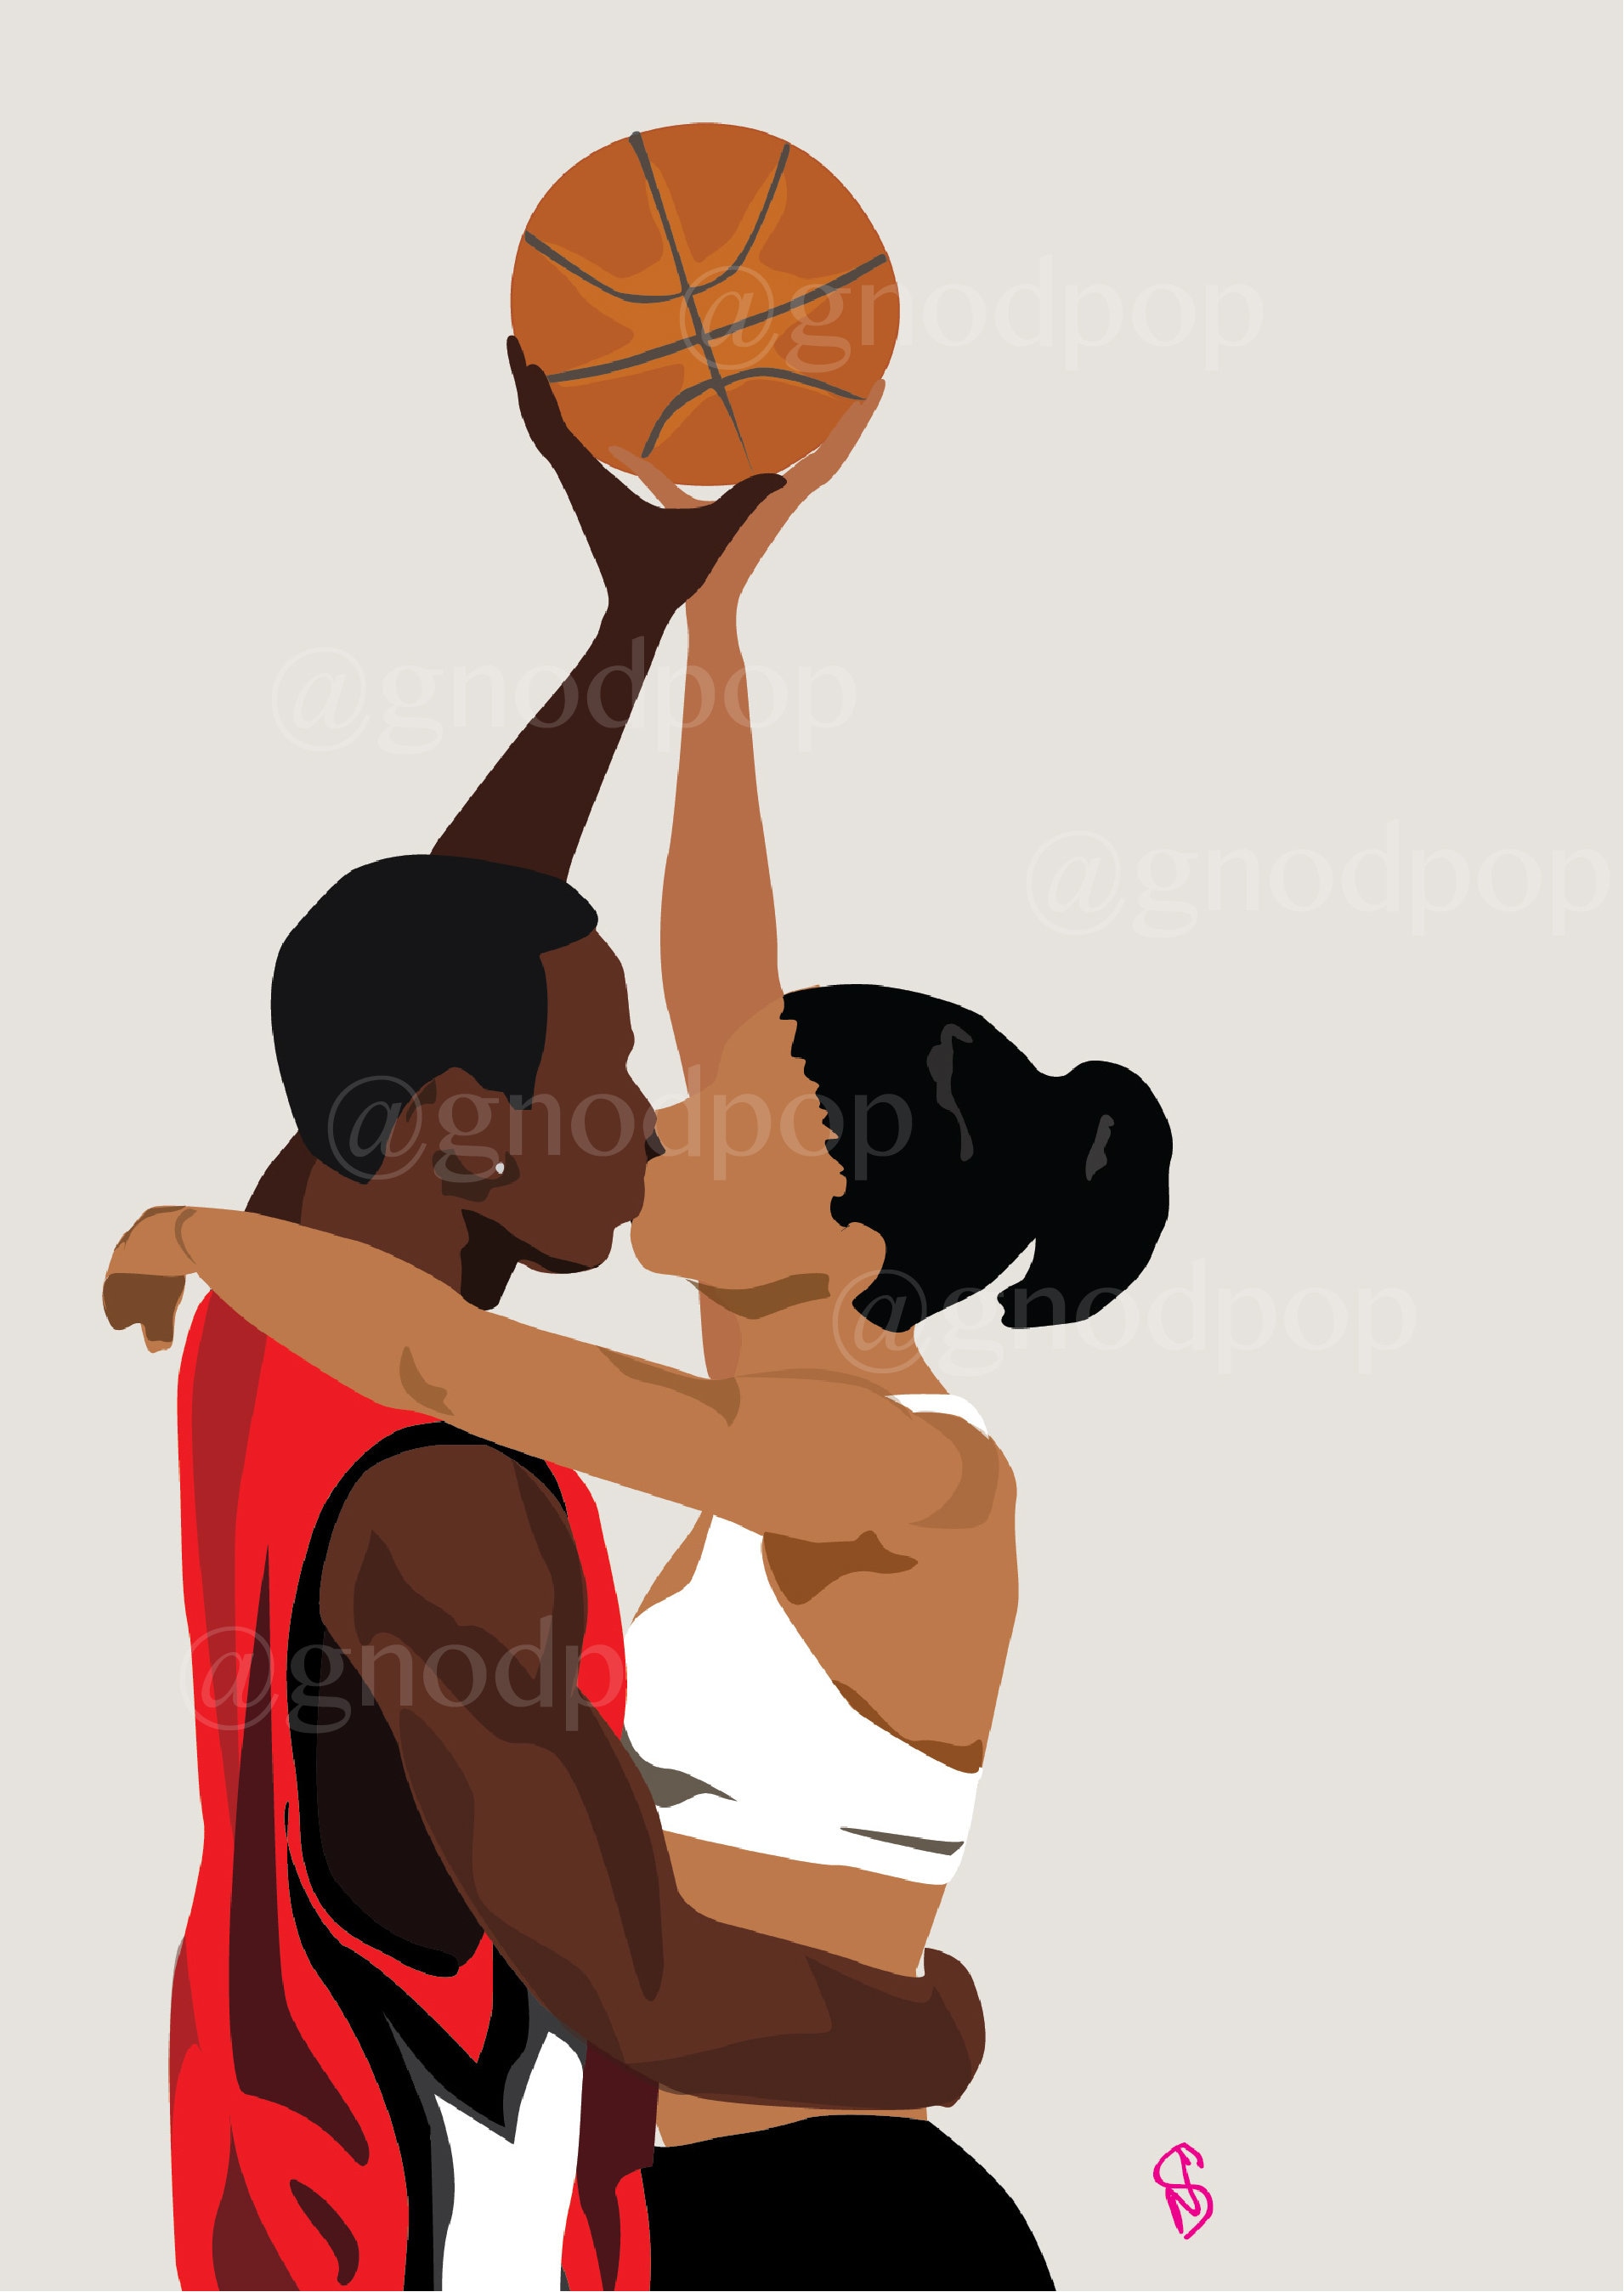 Download American Basketball Player Norman Powell Illustration Wallpaper